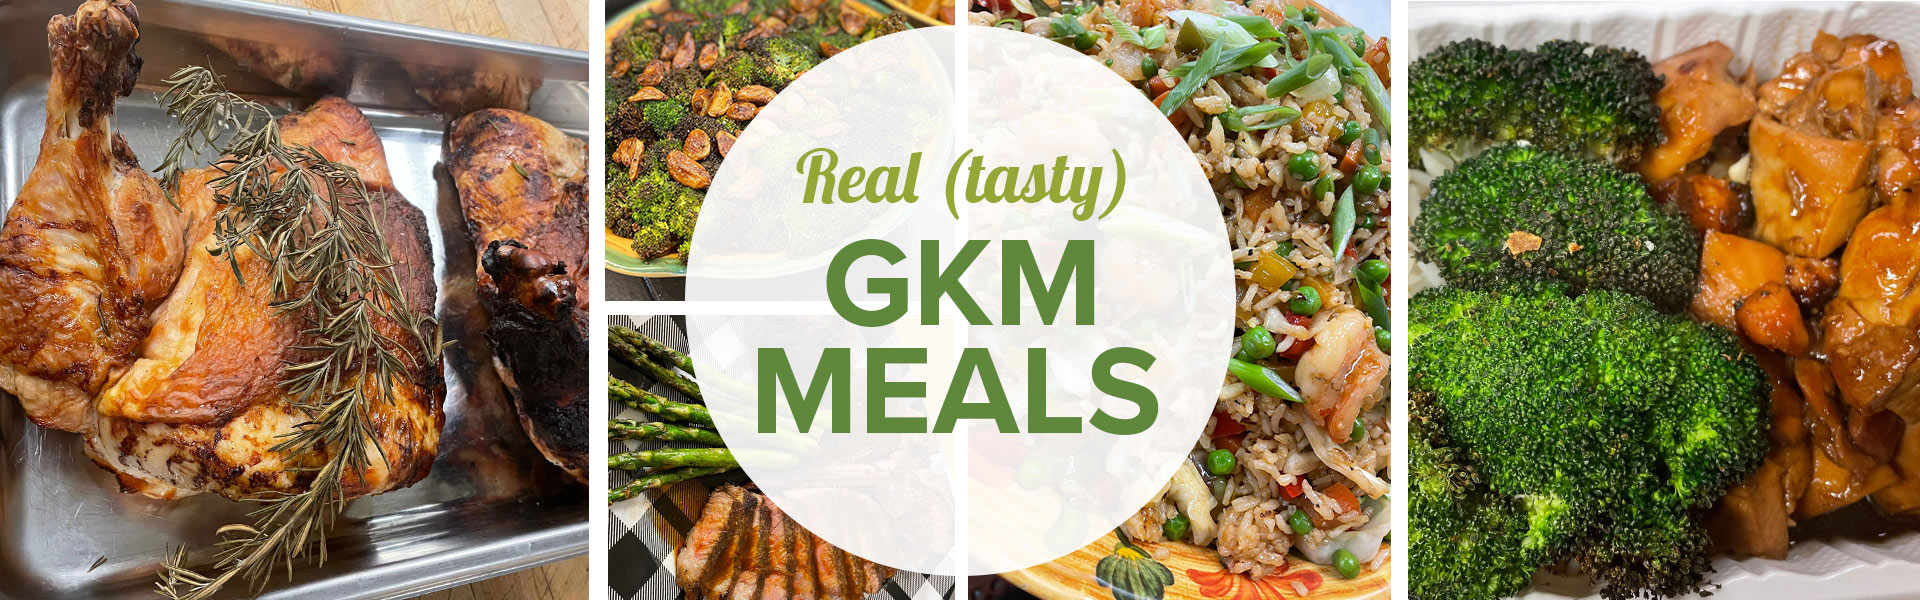 Real (tasty) GKM Meals